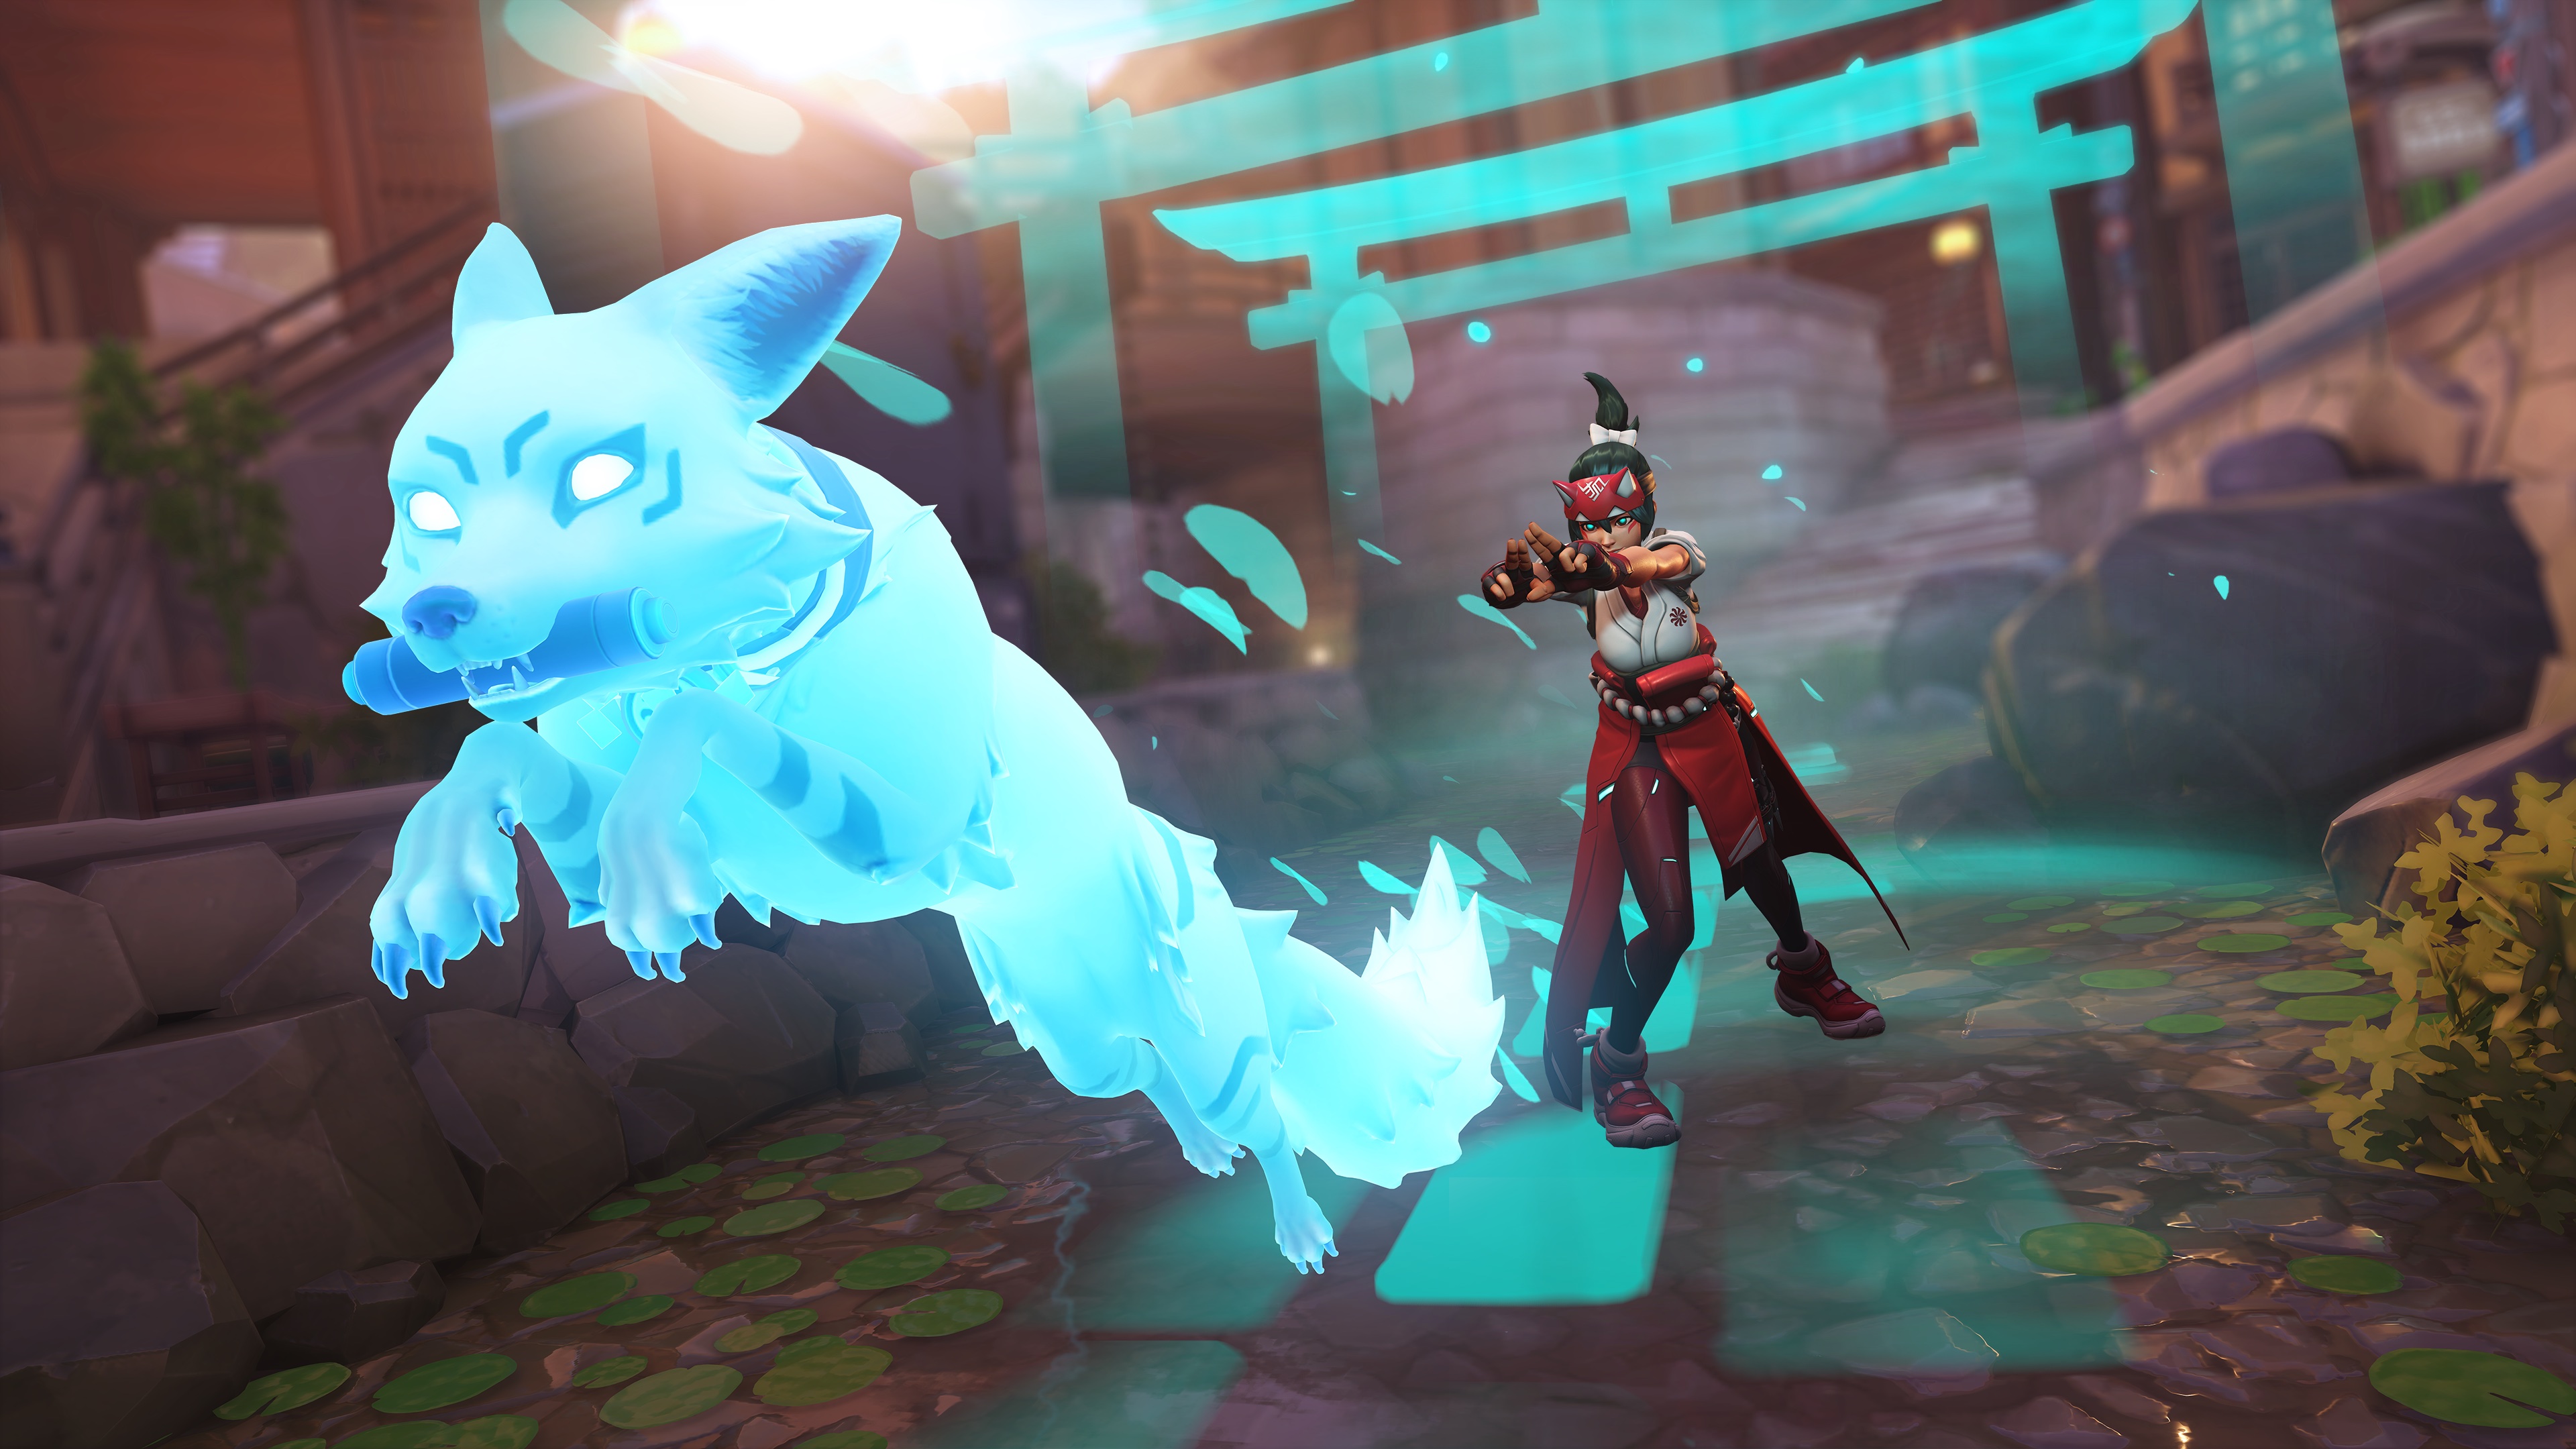 Kiriko sends out her spirit fox as part of her Kitsune Rush ability in Overwatch 2